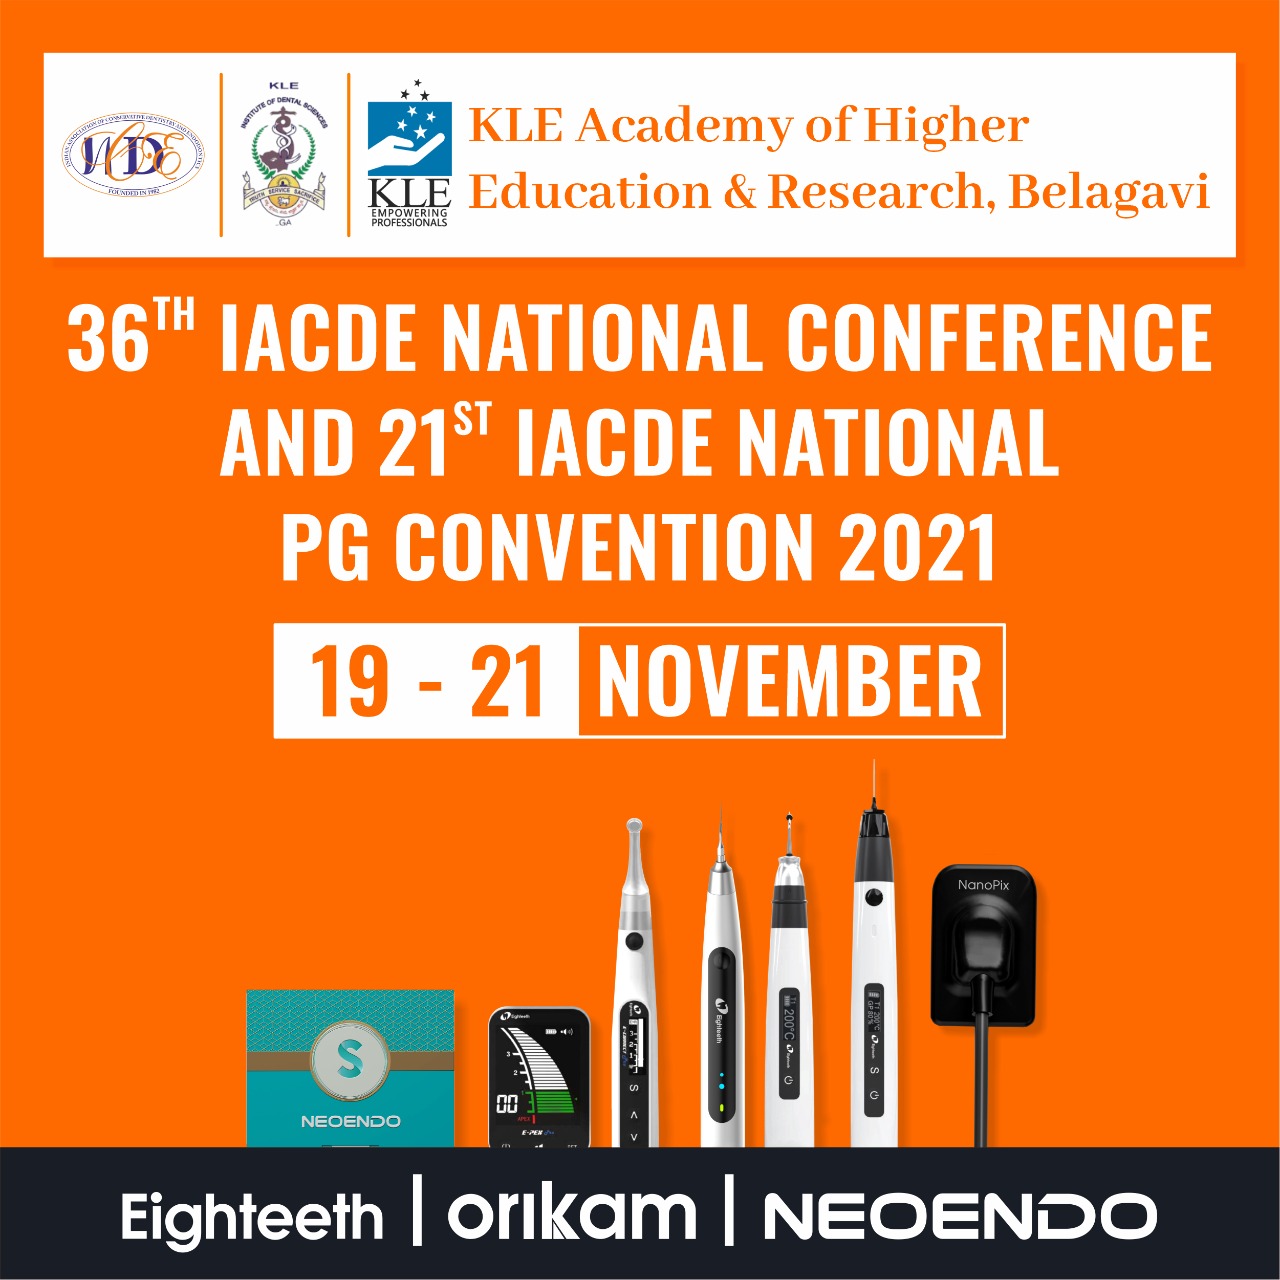 21st IACDE National Conference | Orikam Healthcare